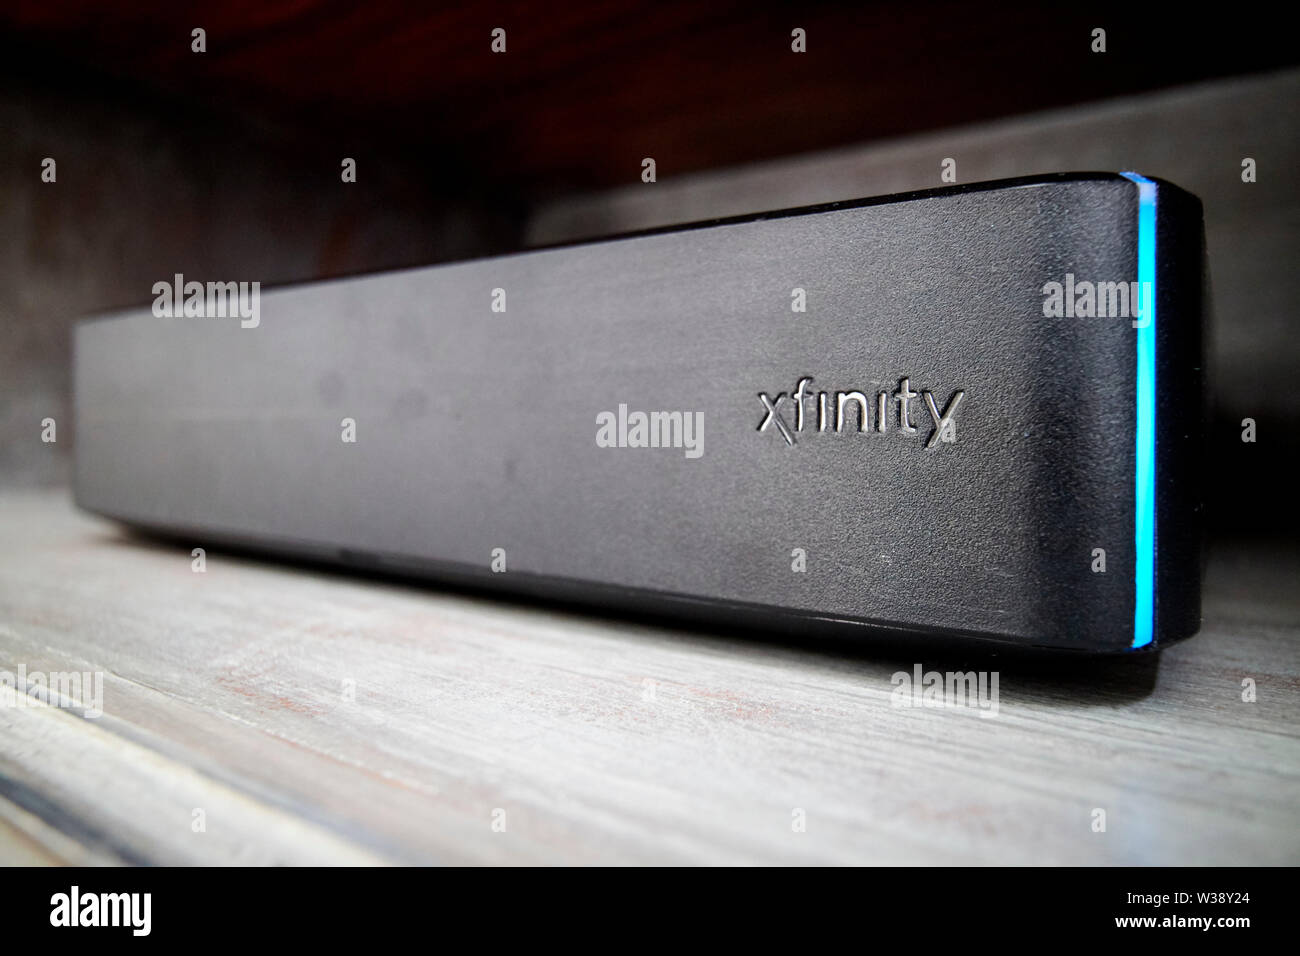 xfinity household domestic cable tv set top box USA United States of America Stock Photo